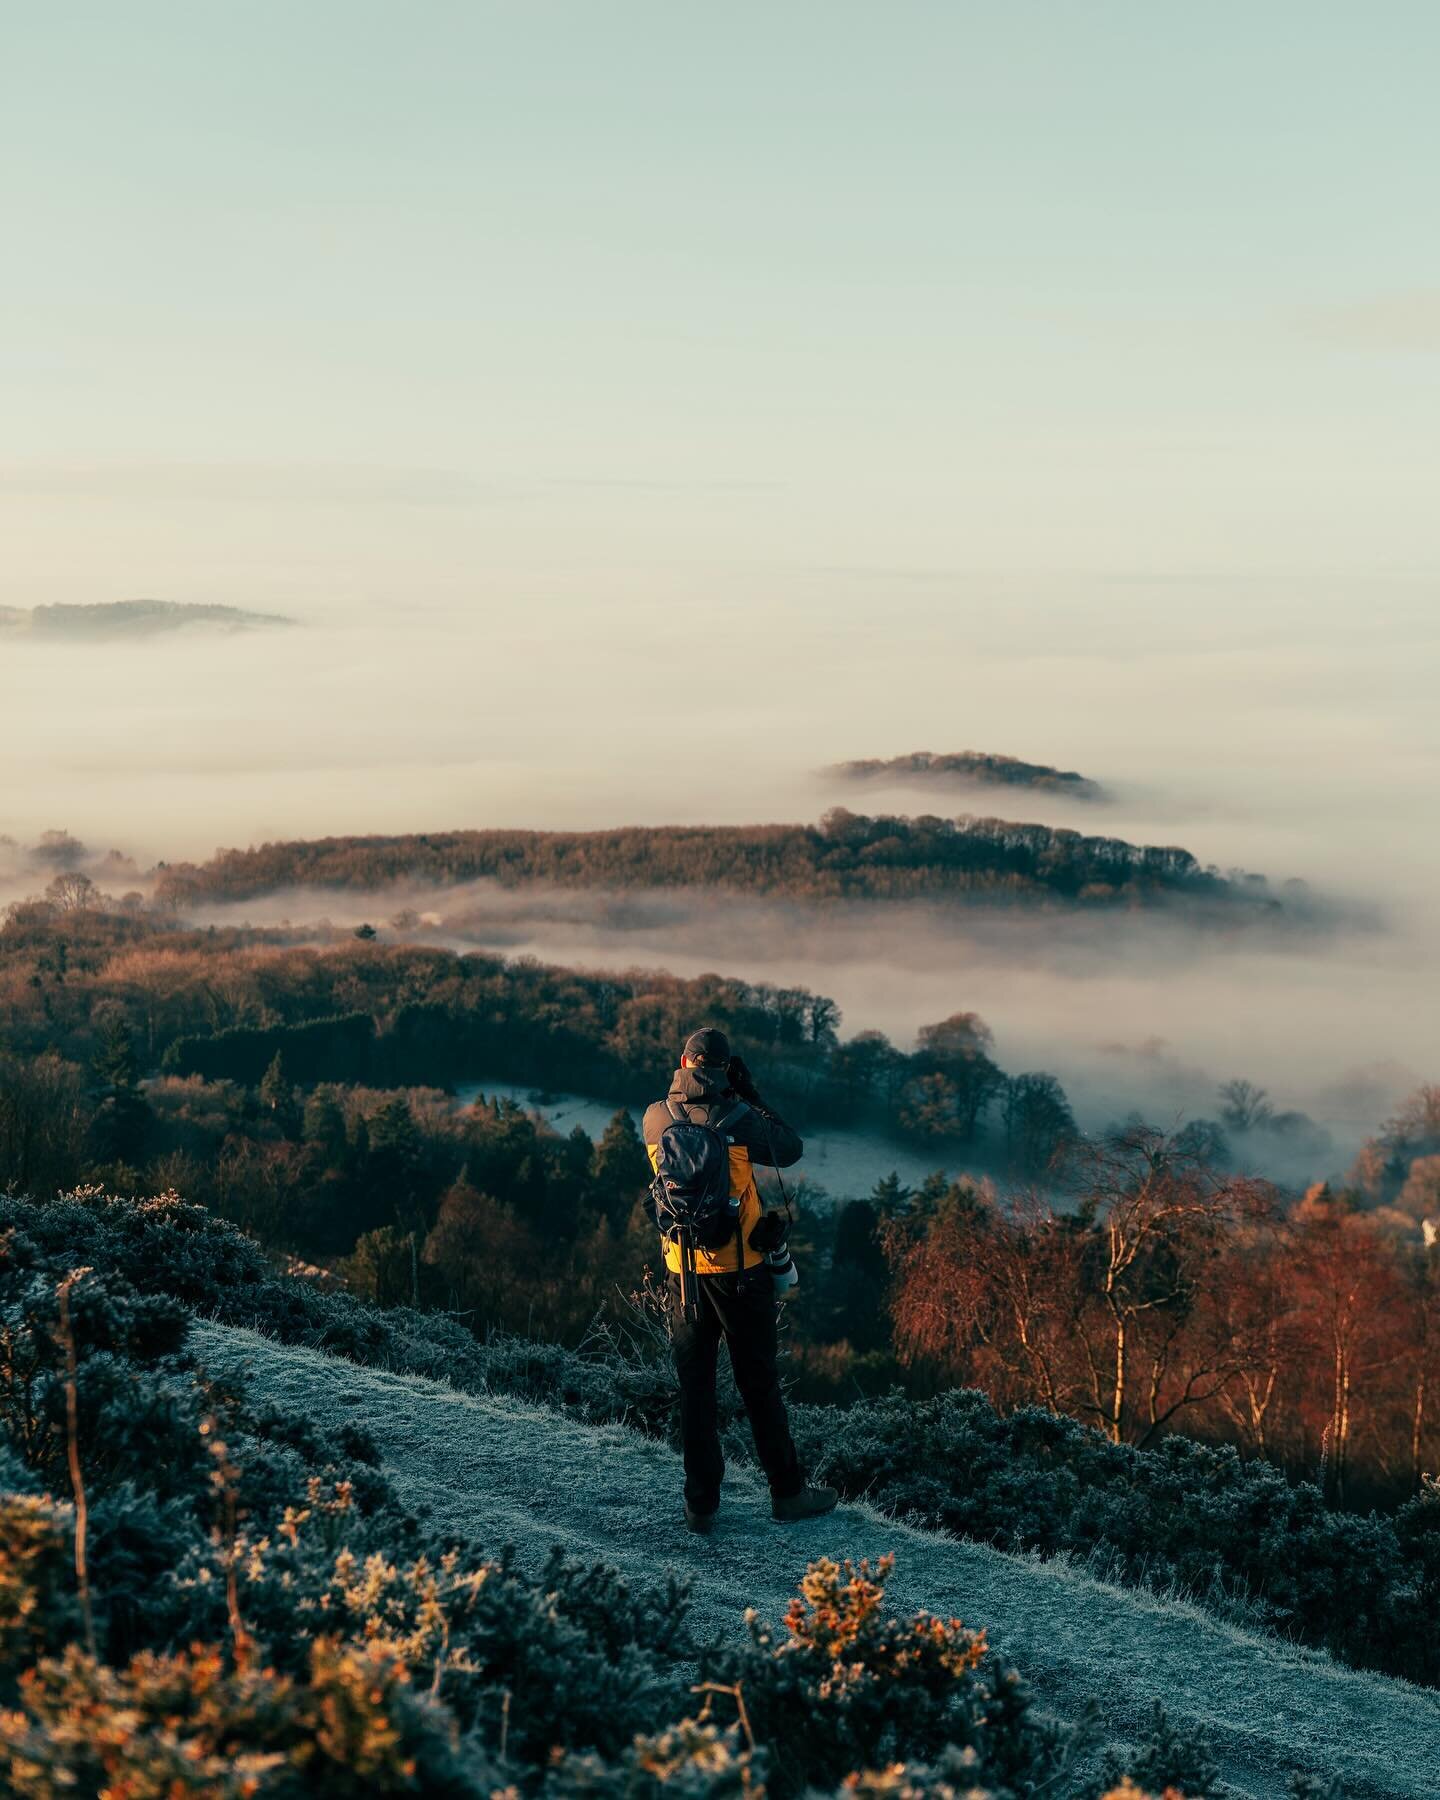 Another trip for a magical early morning in the Malvern Hills with @rwmbutch followed by as always a trip to @faunmalvern after :)

#malvernhills #visitmalvern #visitworcestershire #worcestershire #malvern #malvernphotos #cloudinversion #sunrise #sun